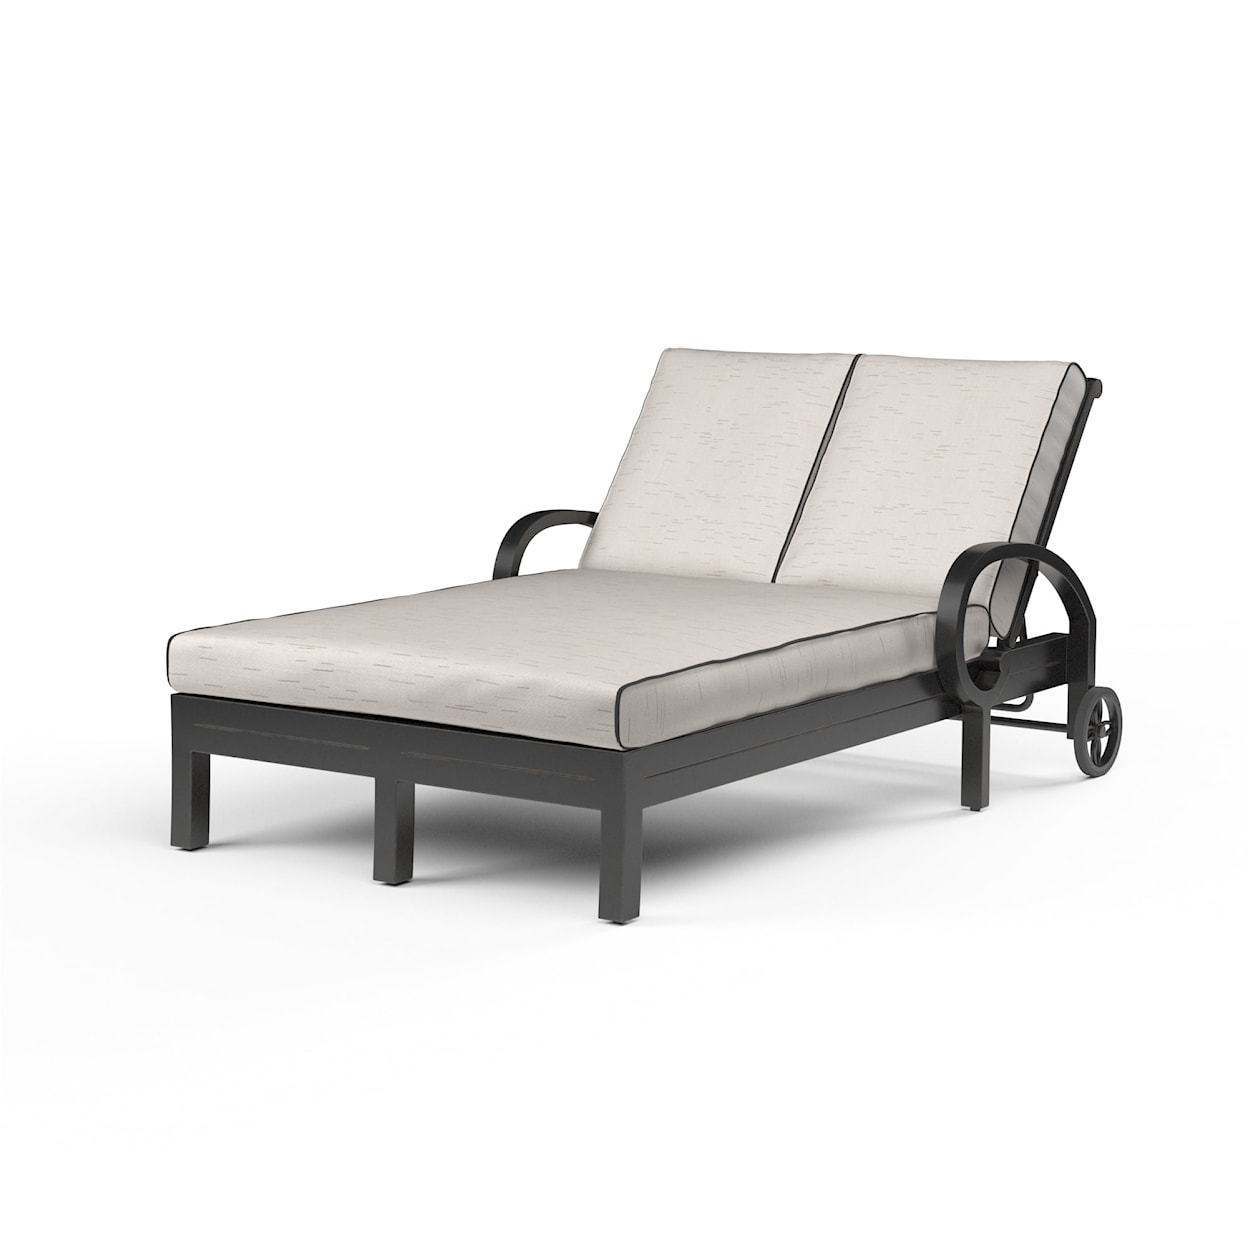 Sunset West Monterey Upholstered Double Chaise